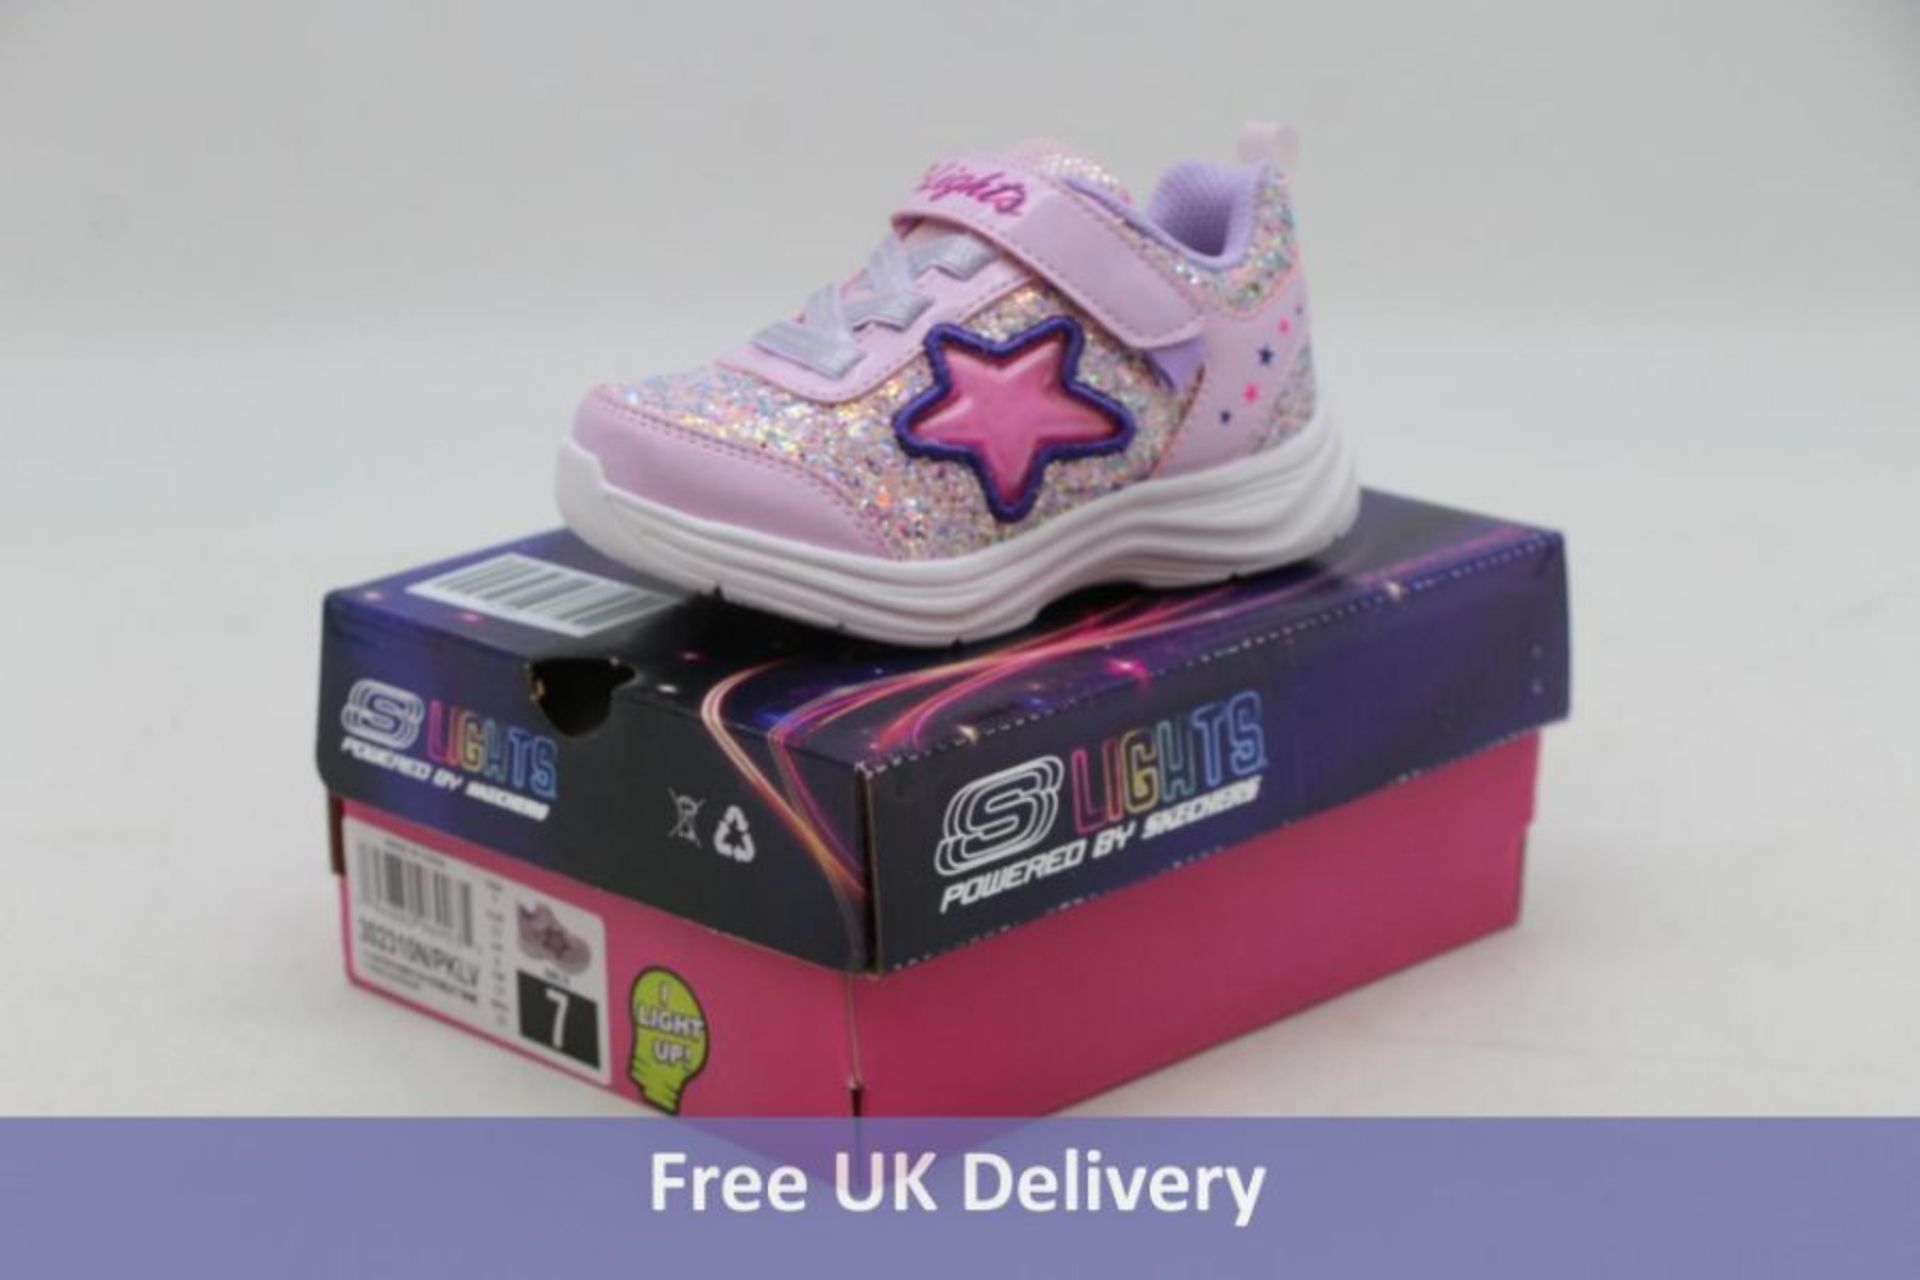 Three Skechers Kid's Trainers to include 1x Heart Lights Shimmer, Lavender/Aqua, UK 1 and 2x Heart L - Image 3 of 3